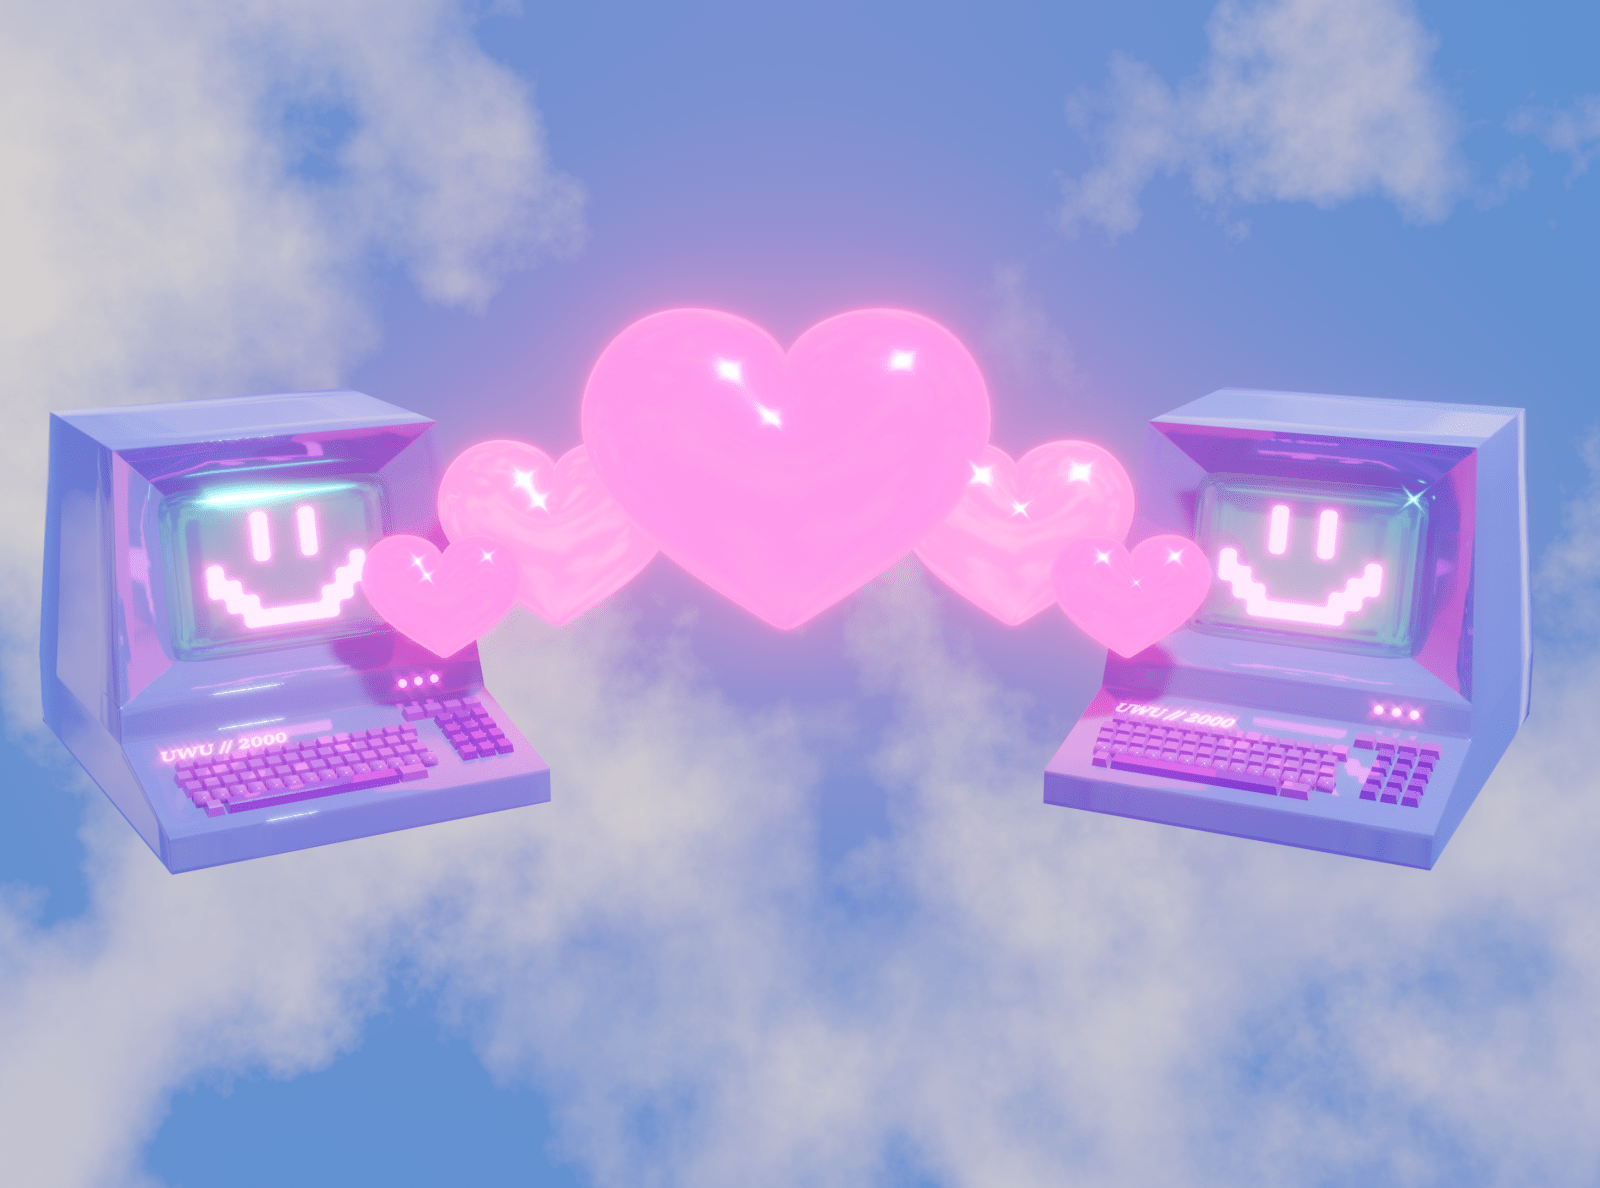 Two old computers with a pink heart and a smiling face between them - 2000s